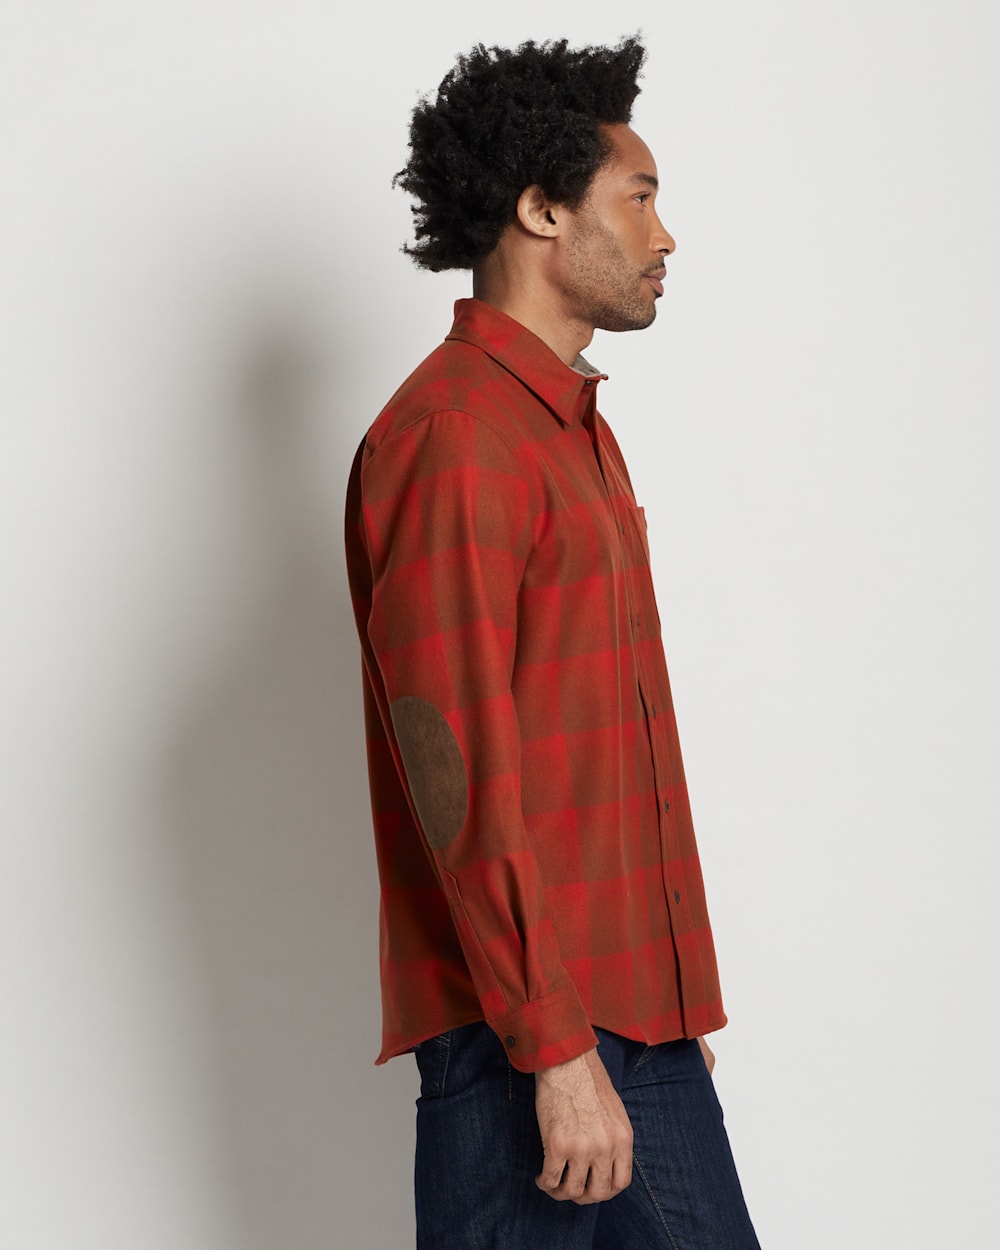 ALTERNATE VIEW OF MEN'S PLAID TRAIL SHIRT IN RED/COPPER OMBRE image number 5